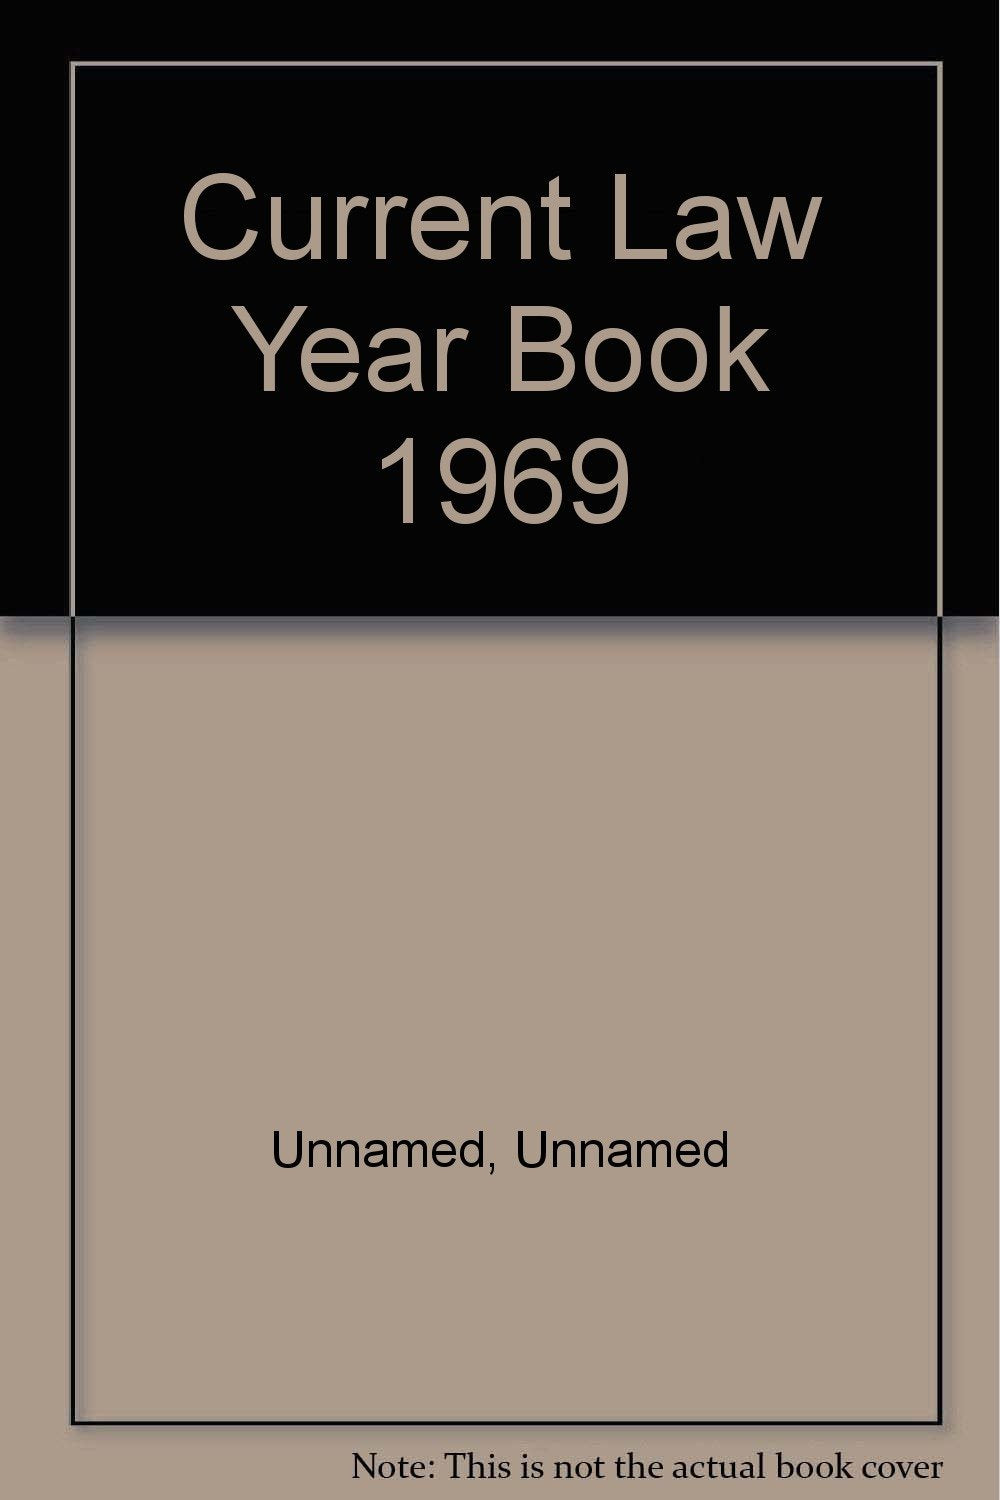 Current Law Year Book 1969